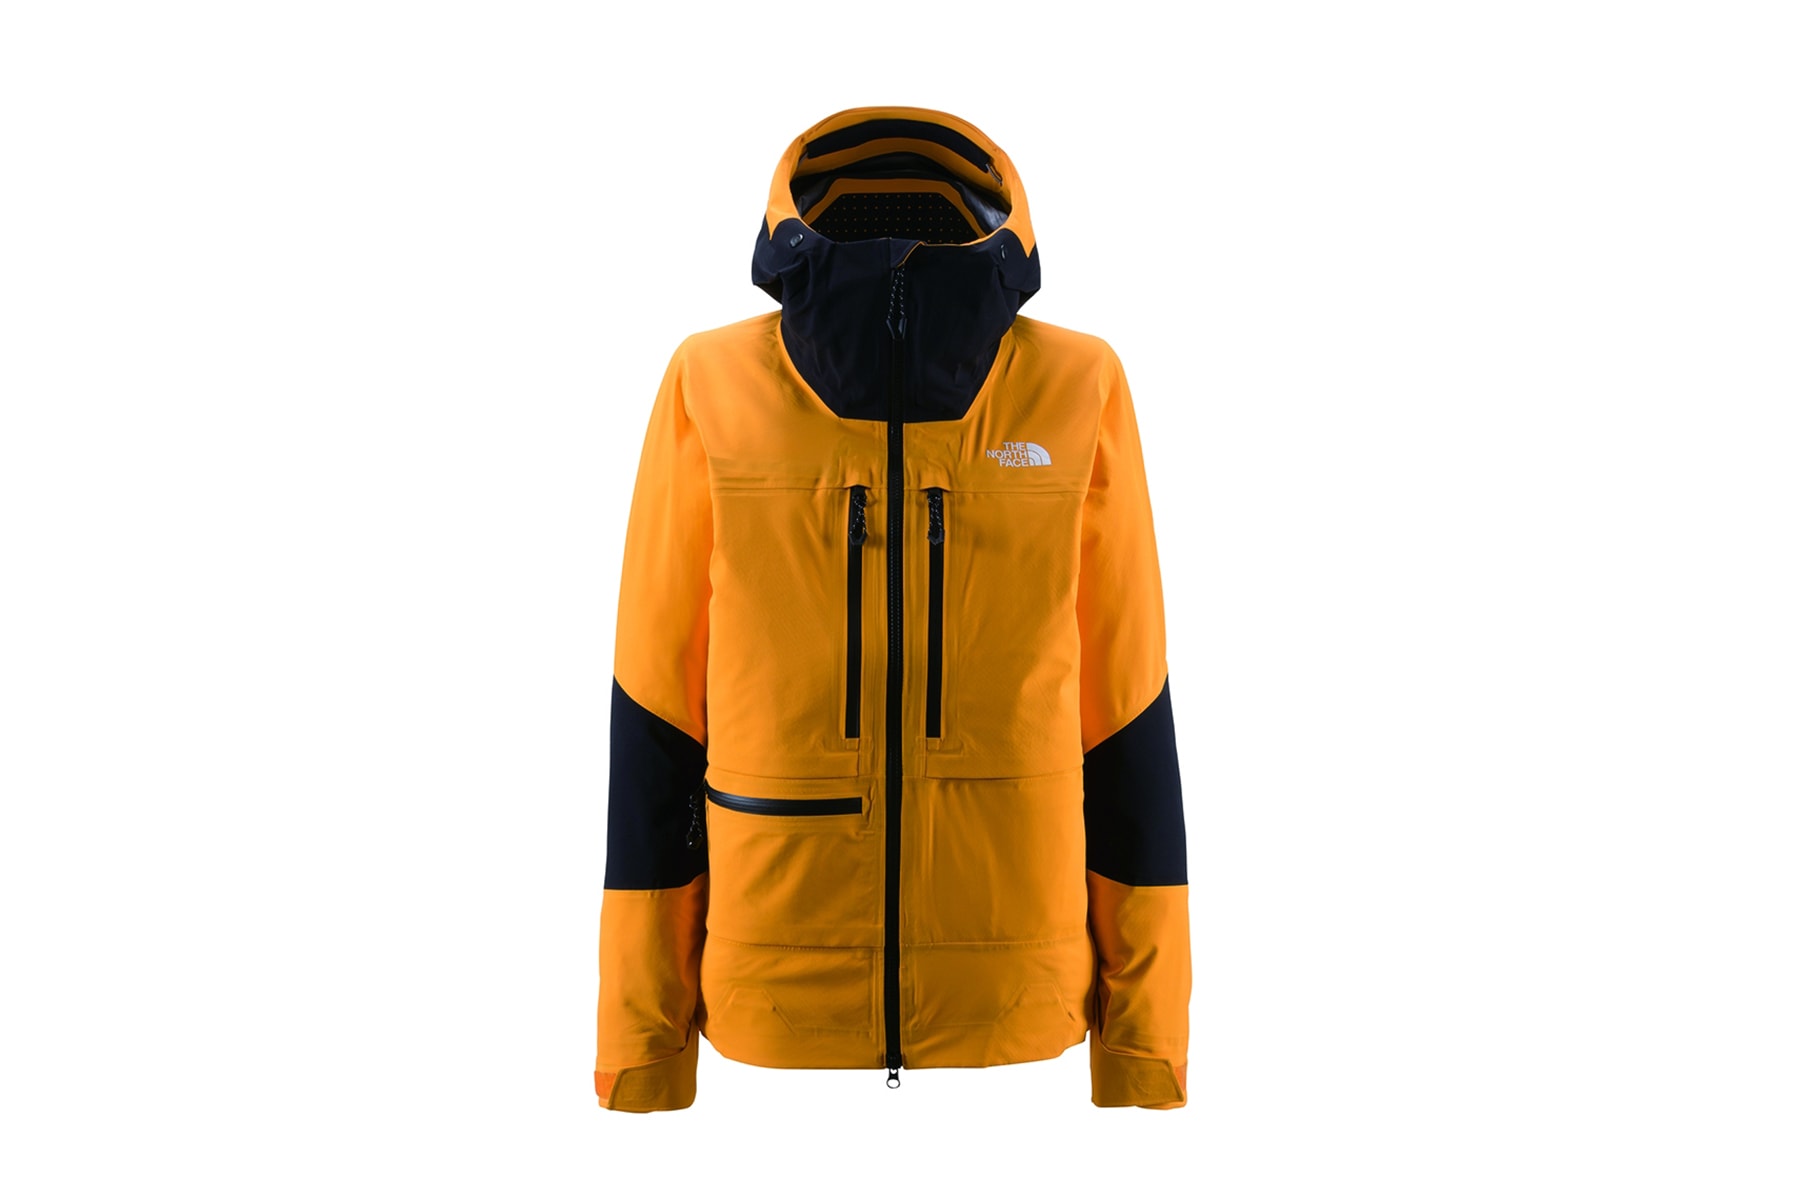 The north face ザ・ノースフェイス drops new latest 防水透湿 新素材 outwear capsule futurelight technical material textile technology outdoor  新作 アウター ジャケット ランニング 登山 スキー 冬